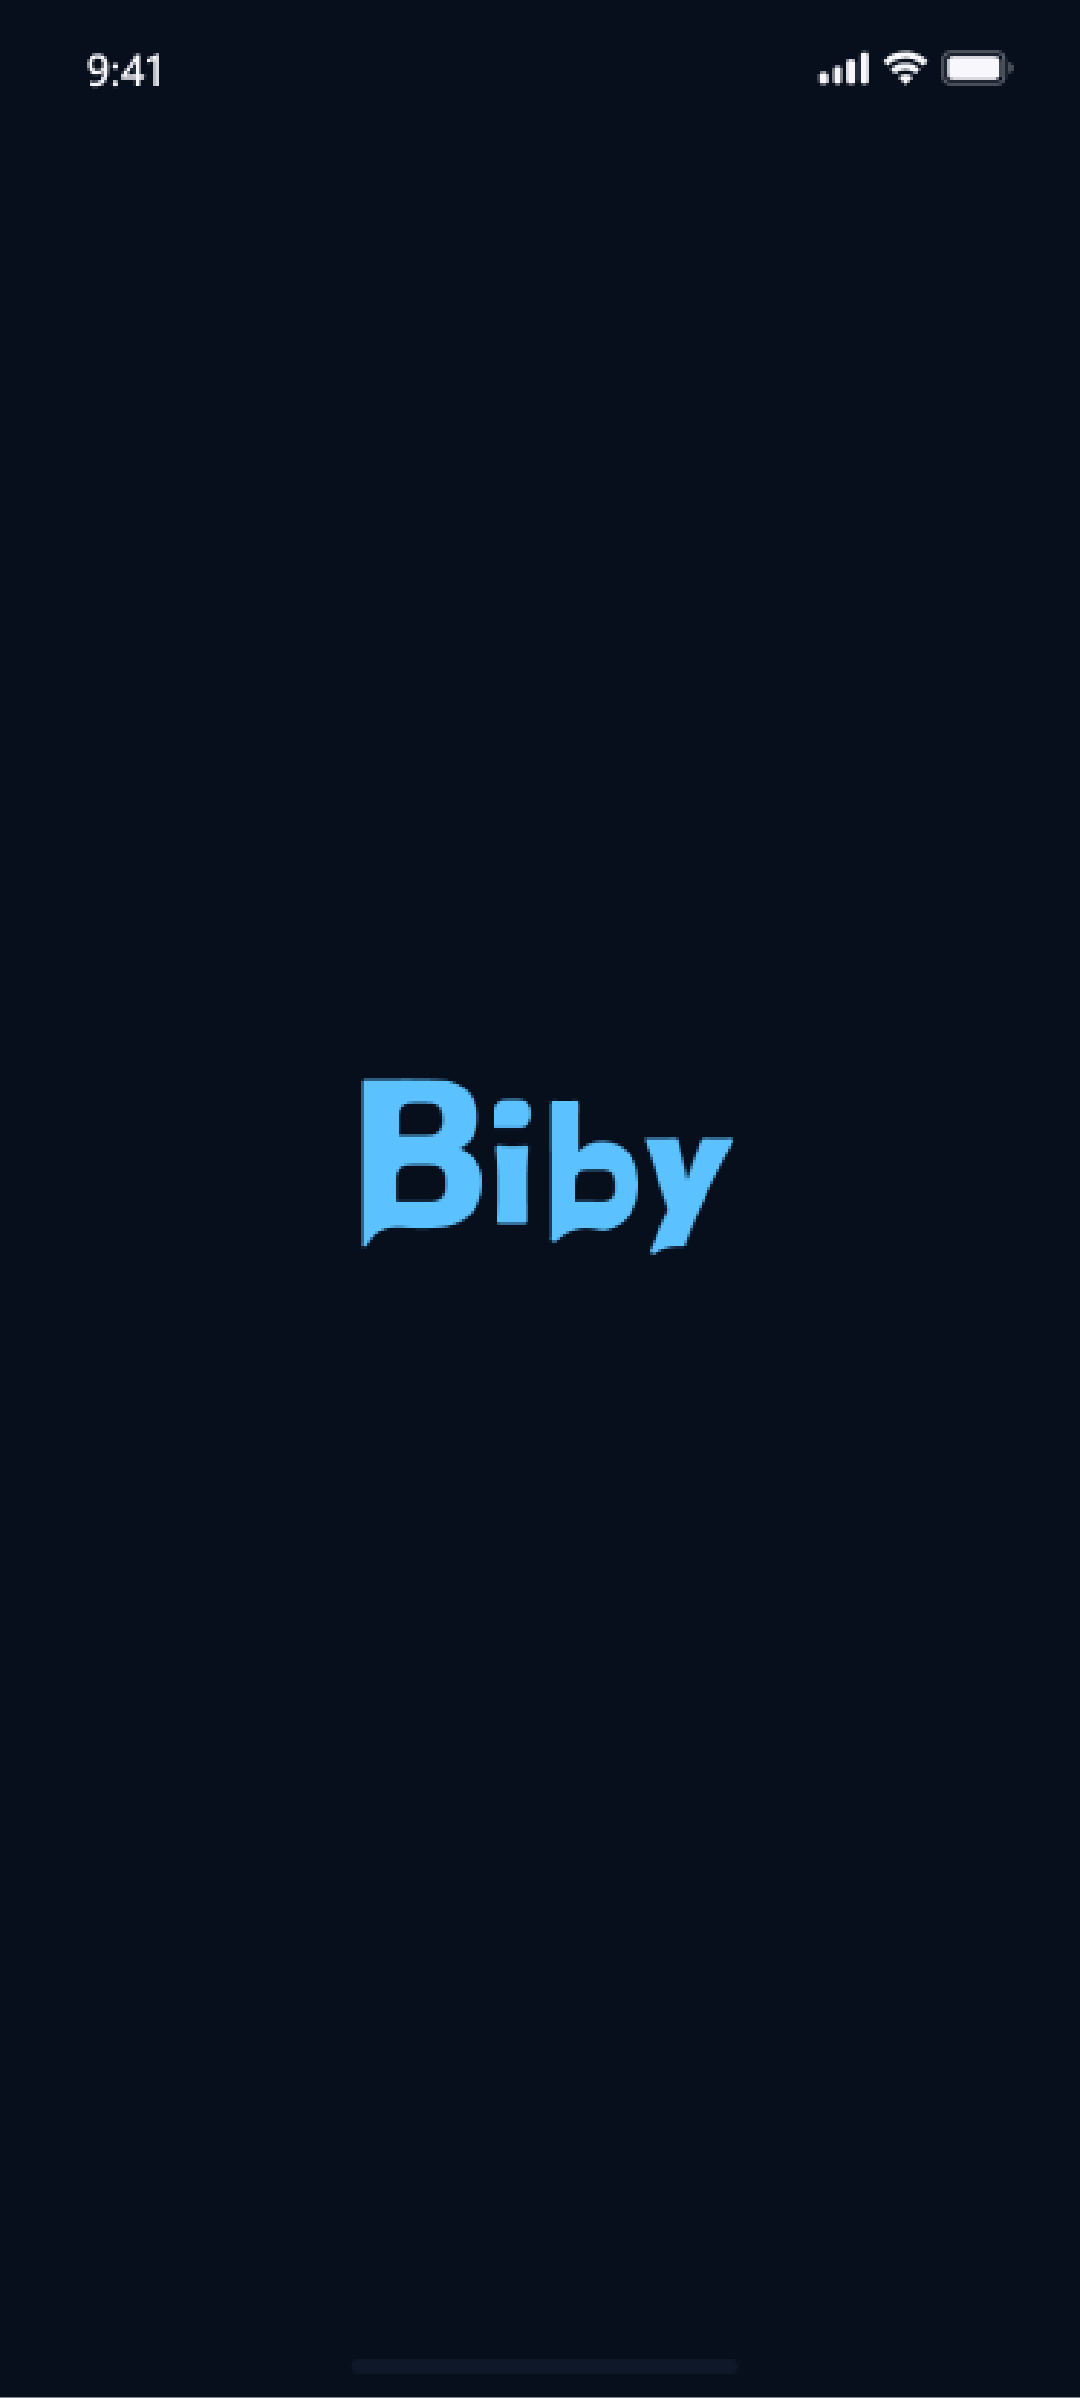 biby-1-1.png